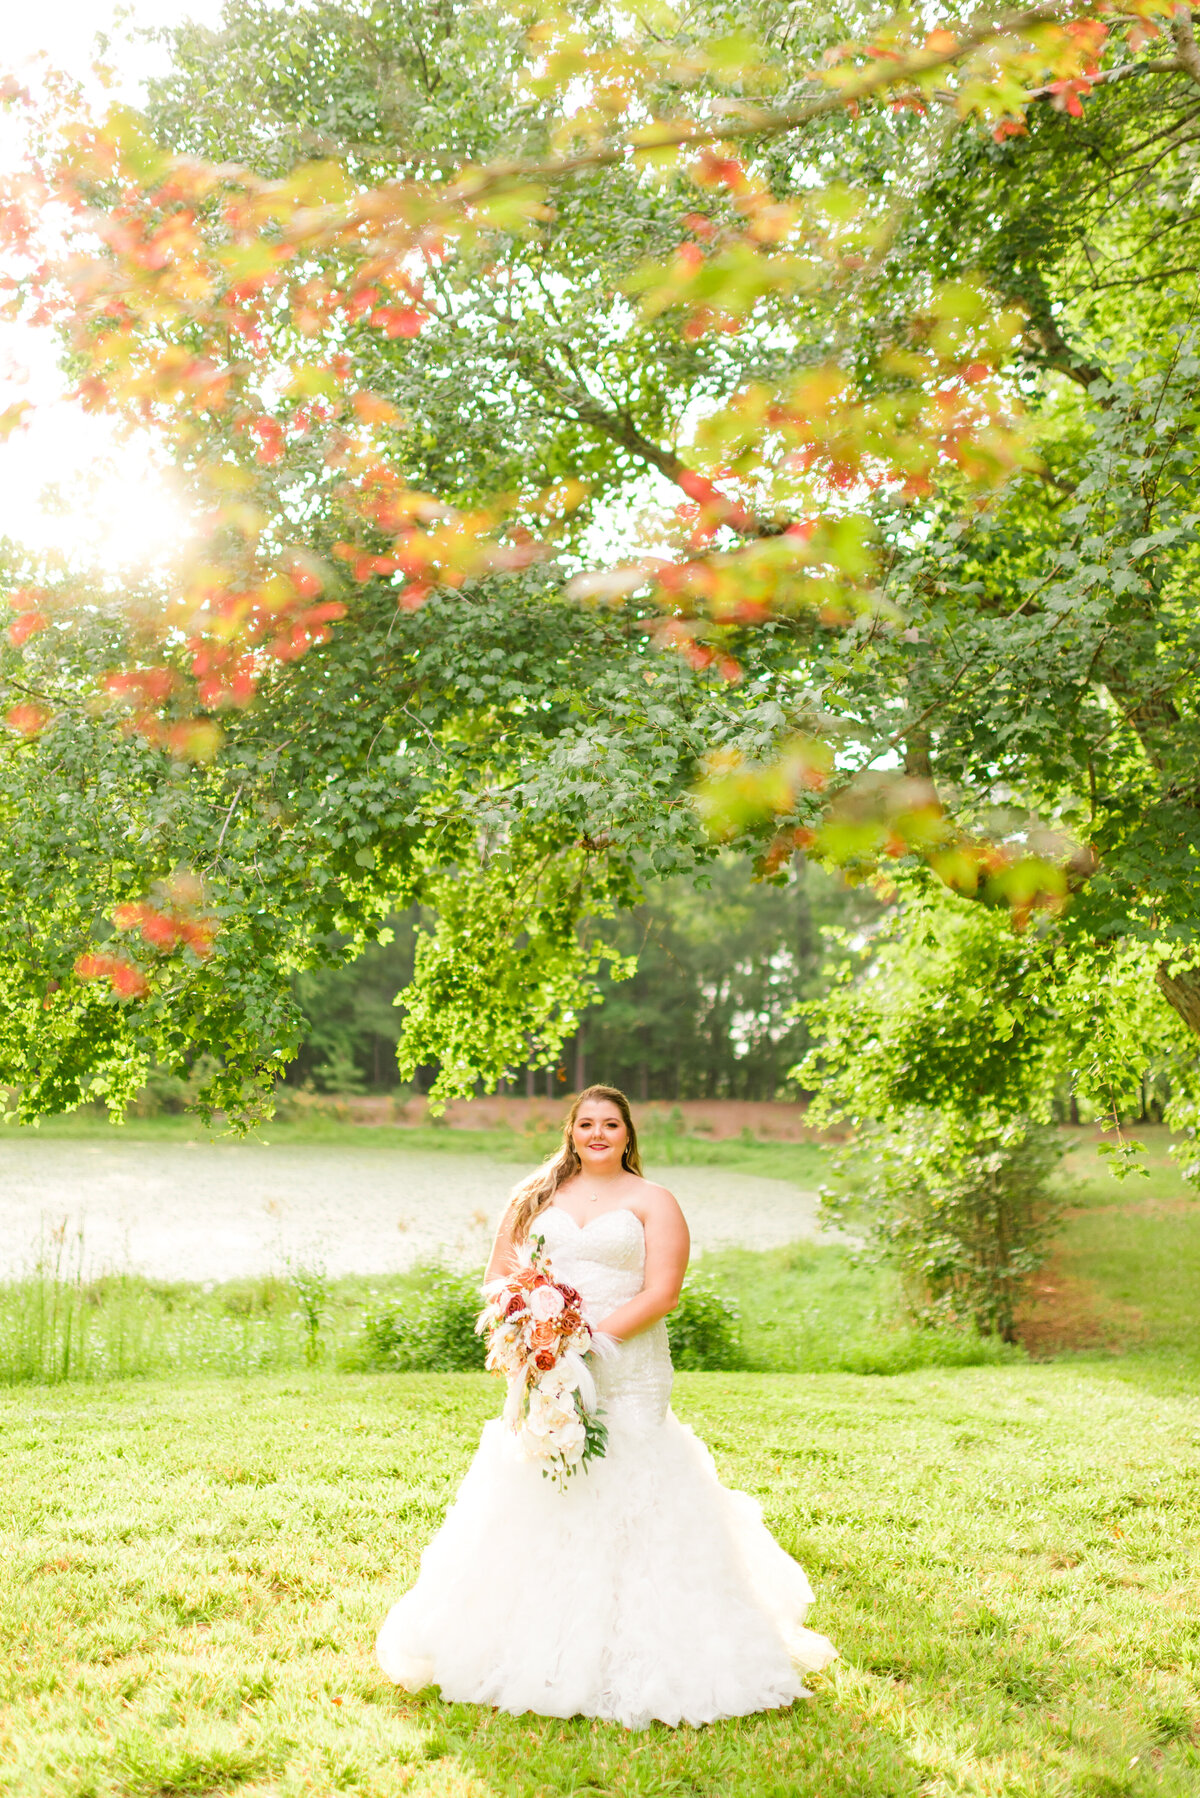 Brittany Overby's Bridals - Photography by Gerri Anna-17